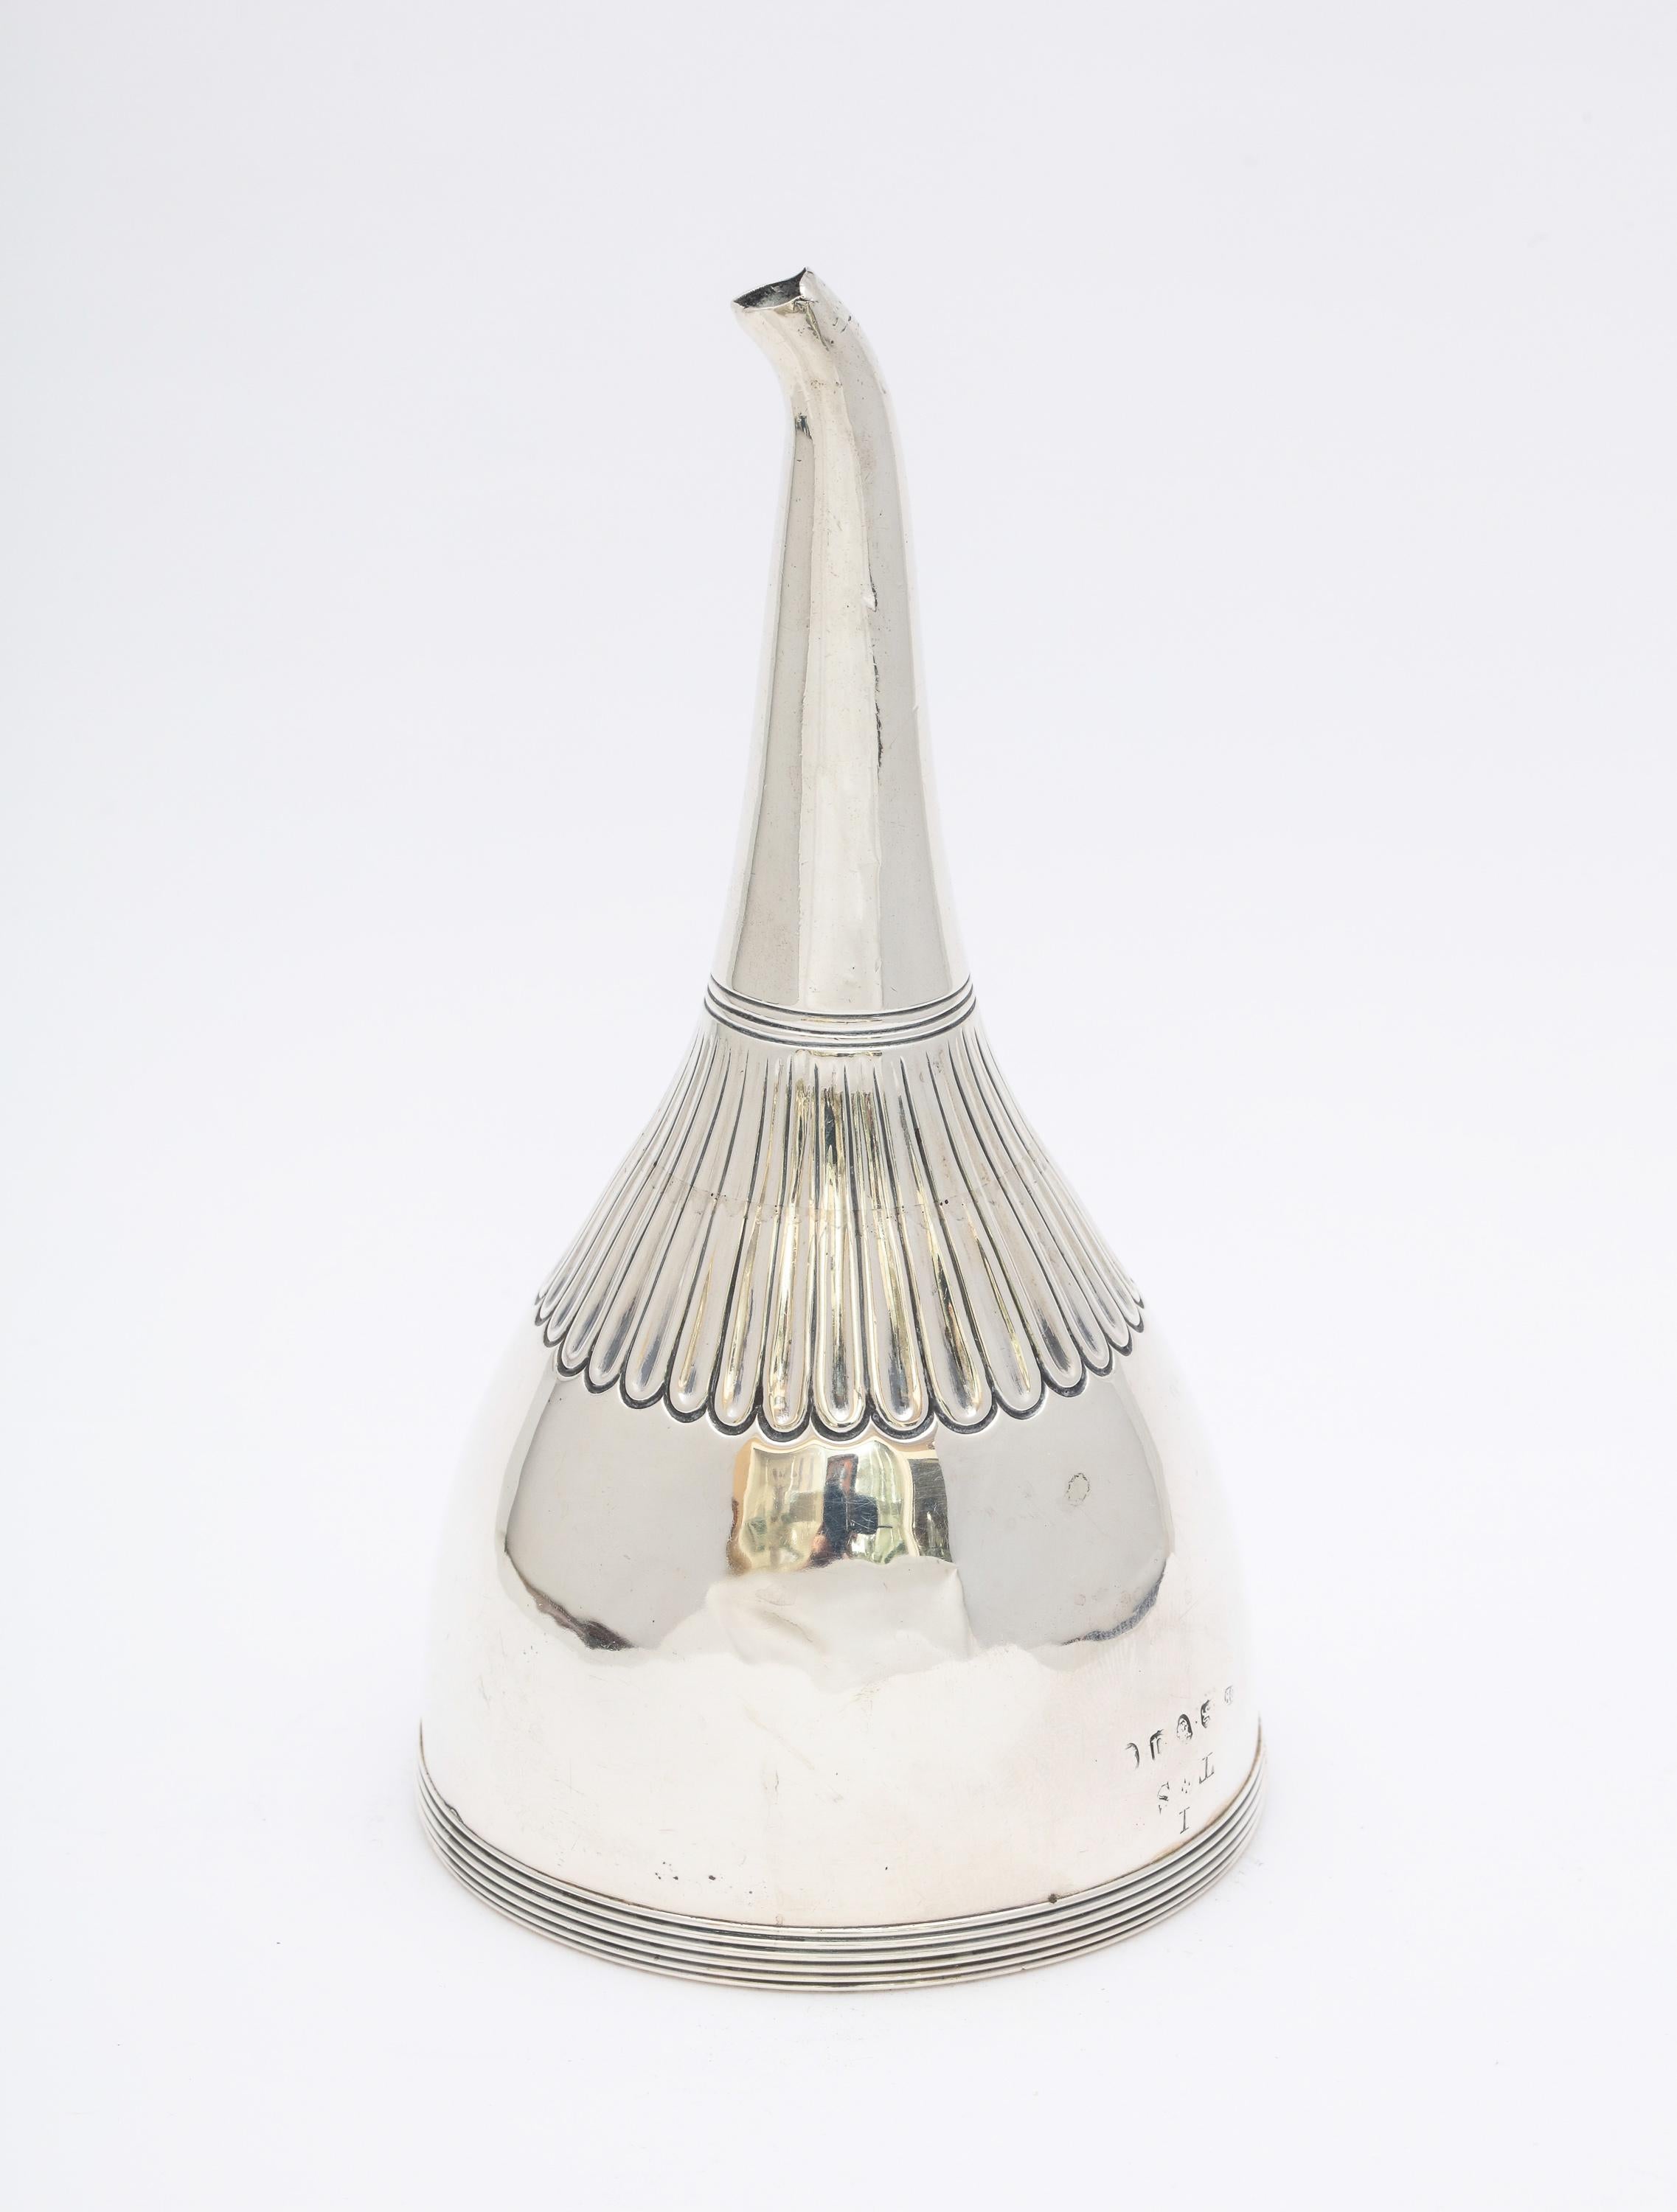 Georgian (George III), sterling silver wine funnel, London, 1779, Crispin Fuller - maker. Measures 5 1/2 inches high x 3 inched diameter across widest opening. Weighs 2.735 troy ounces. Minor dints and wear commensurate with age and use (see